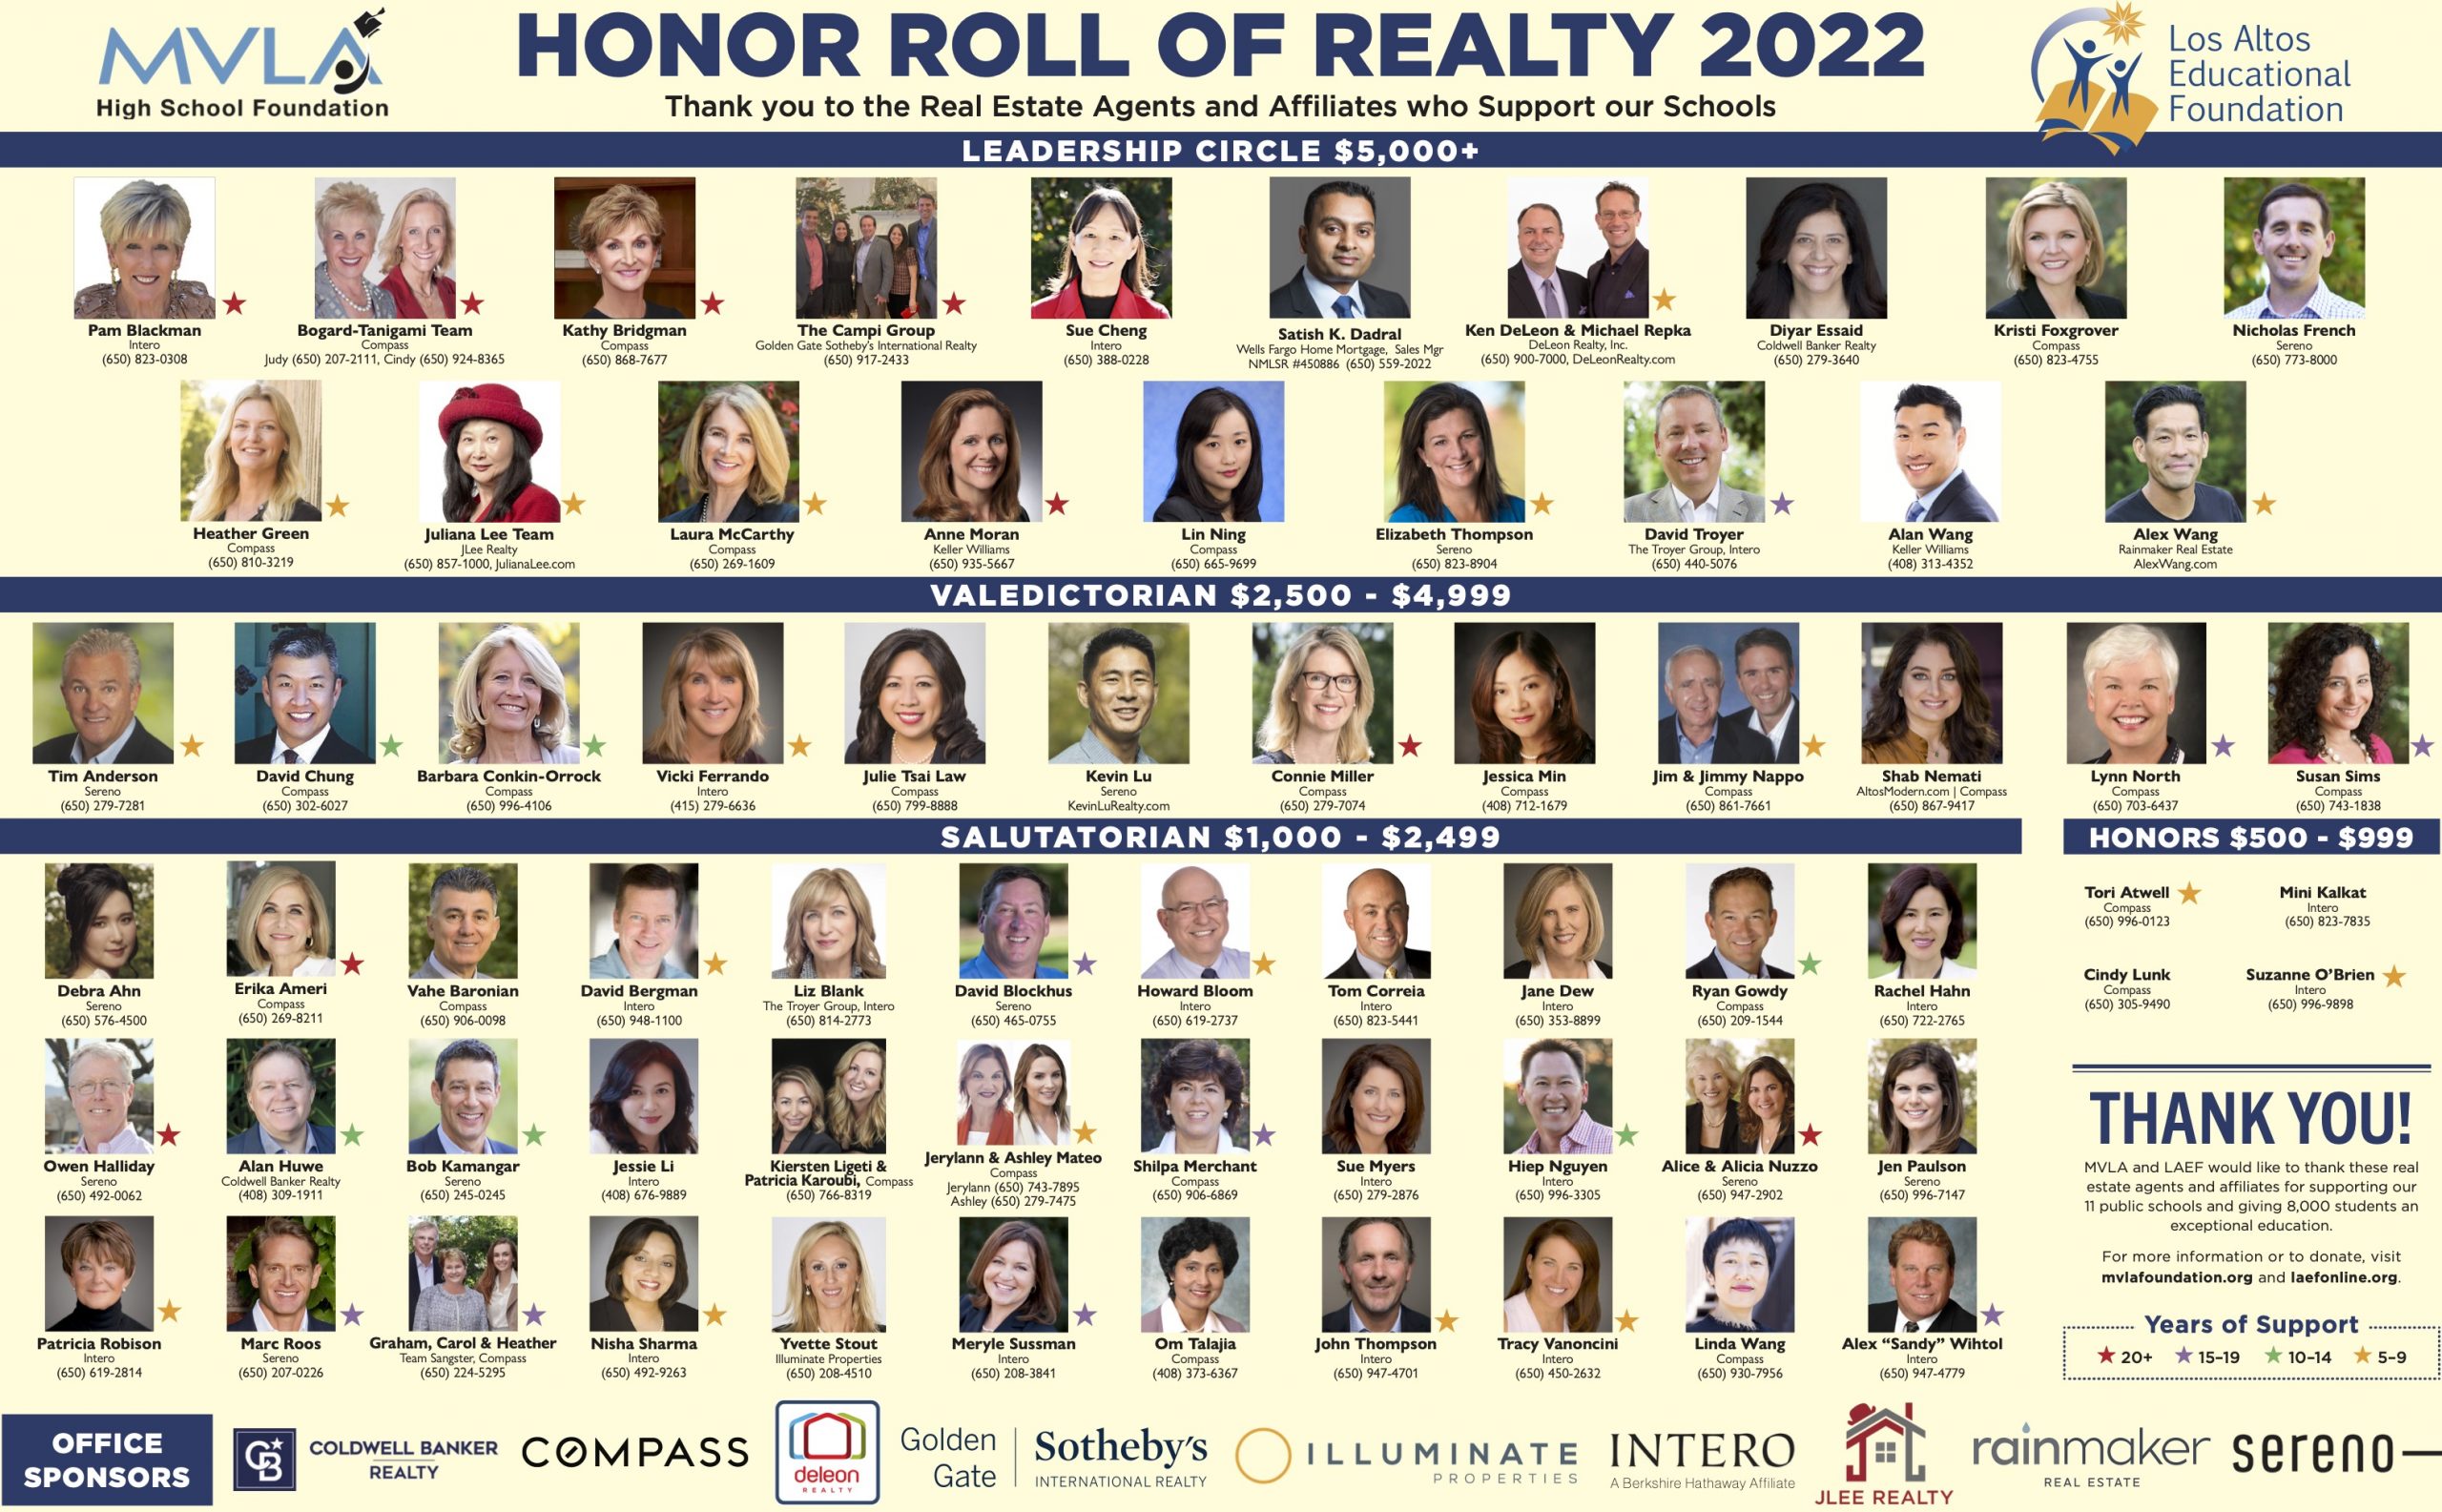 2022 Honor Roll of Realty